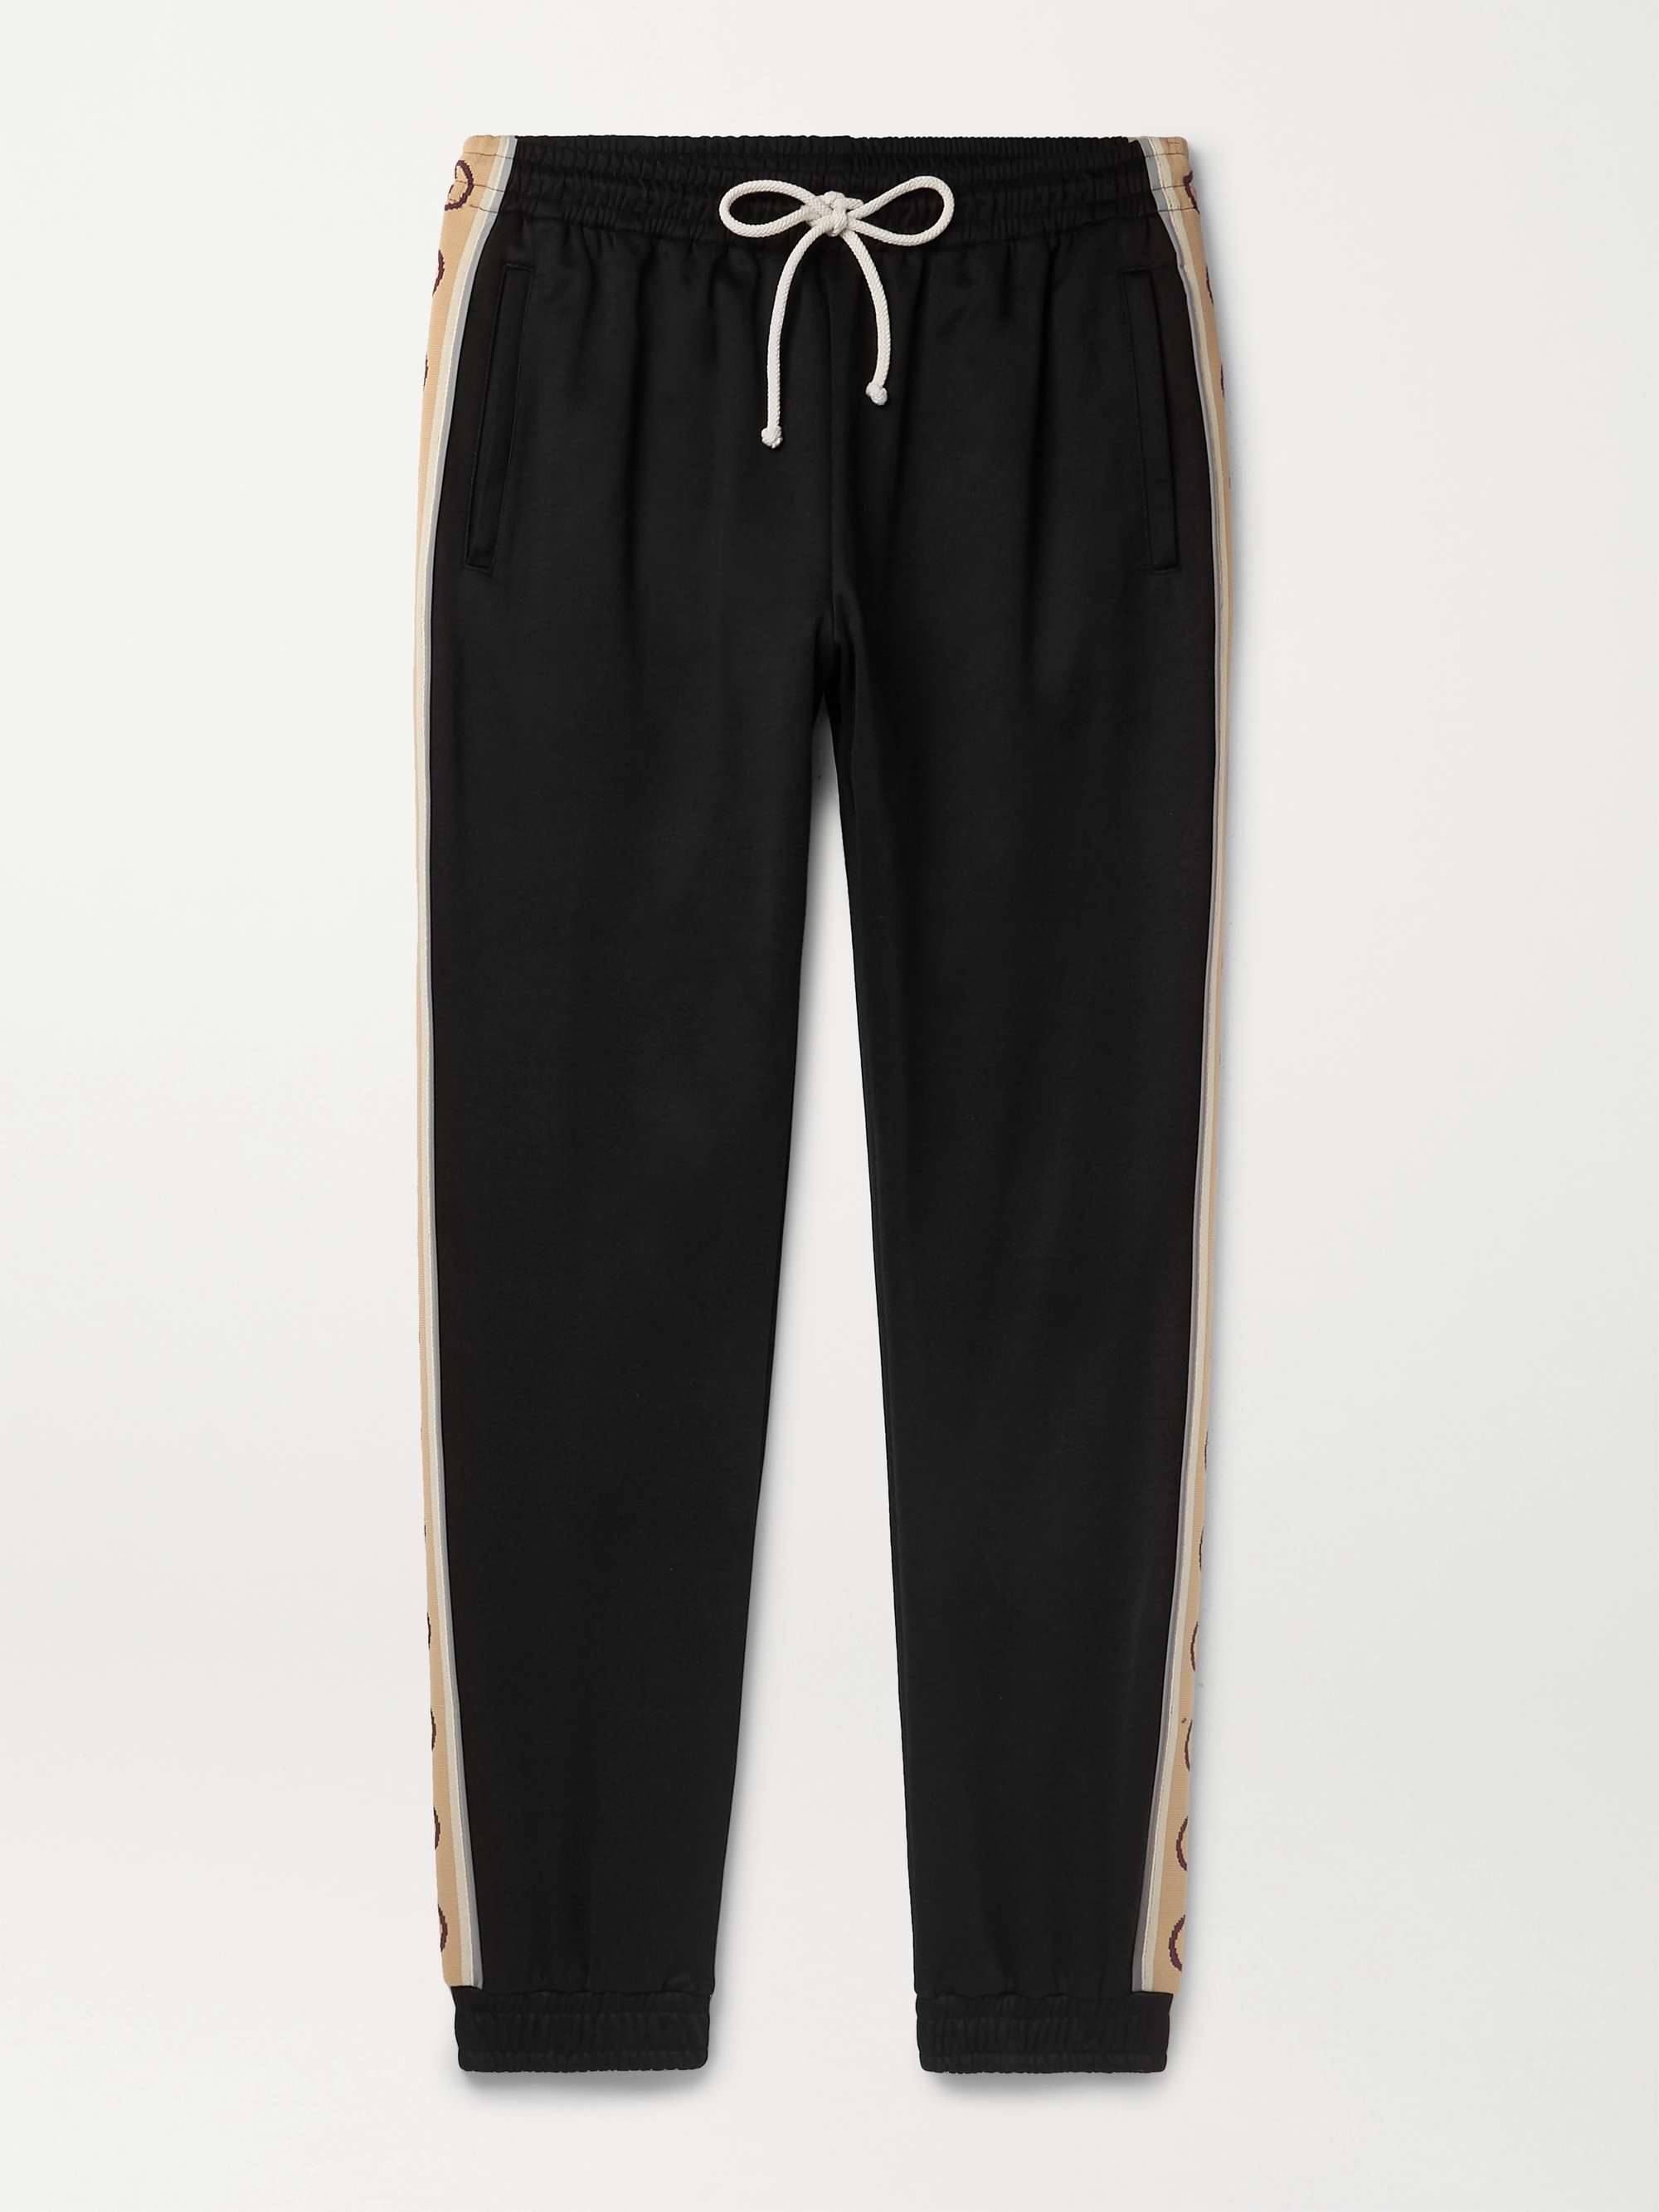 GUCCI Tapered Logo-Jacquard Webbing-Trimmed Tech-Jersey Track Pants | MR